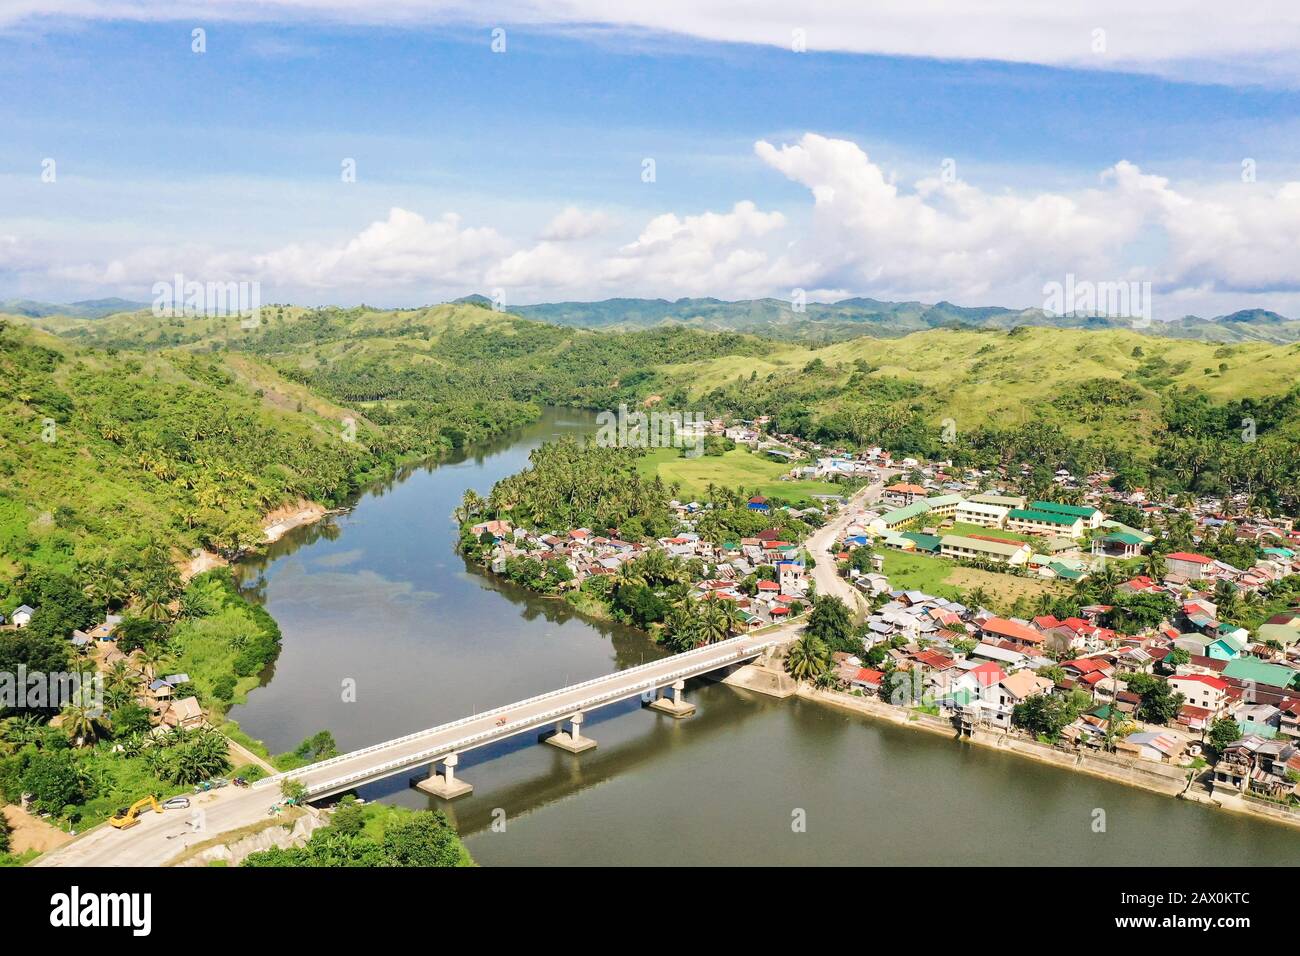 Road bridge on the island of Samar, Philippines.Town on the river bank and road bridge, top view. Bridge over the river, tropical landscape in the afternoon. Summer and travel vacation concept. Stock Photo